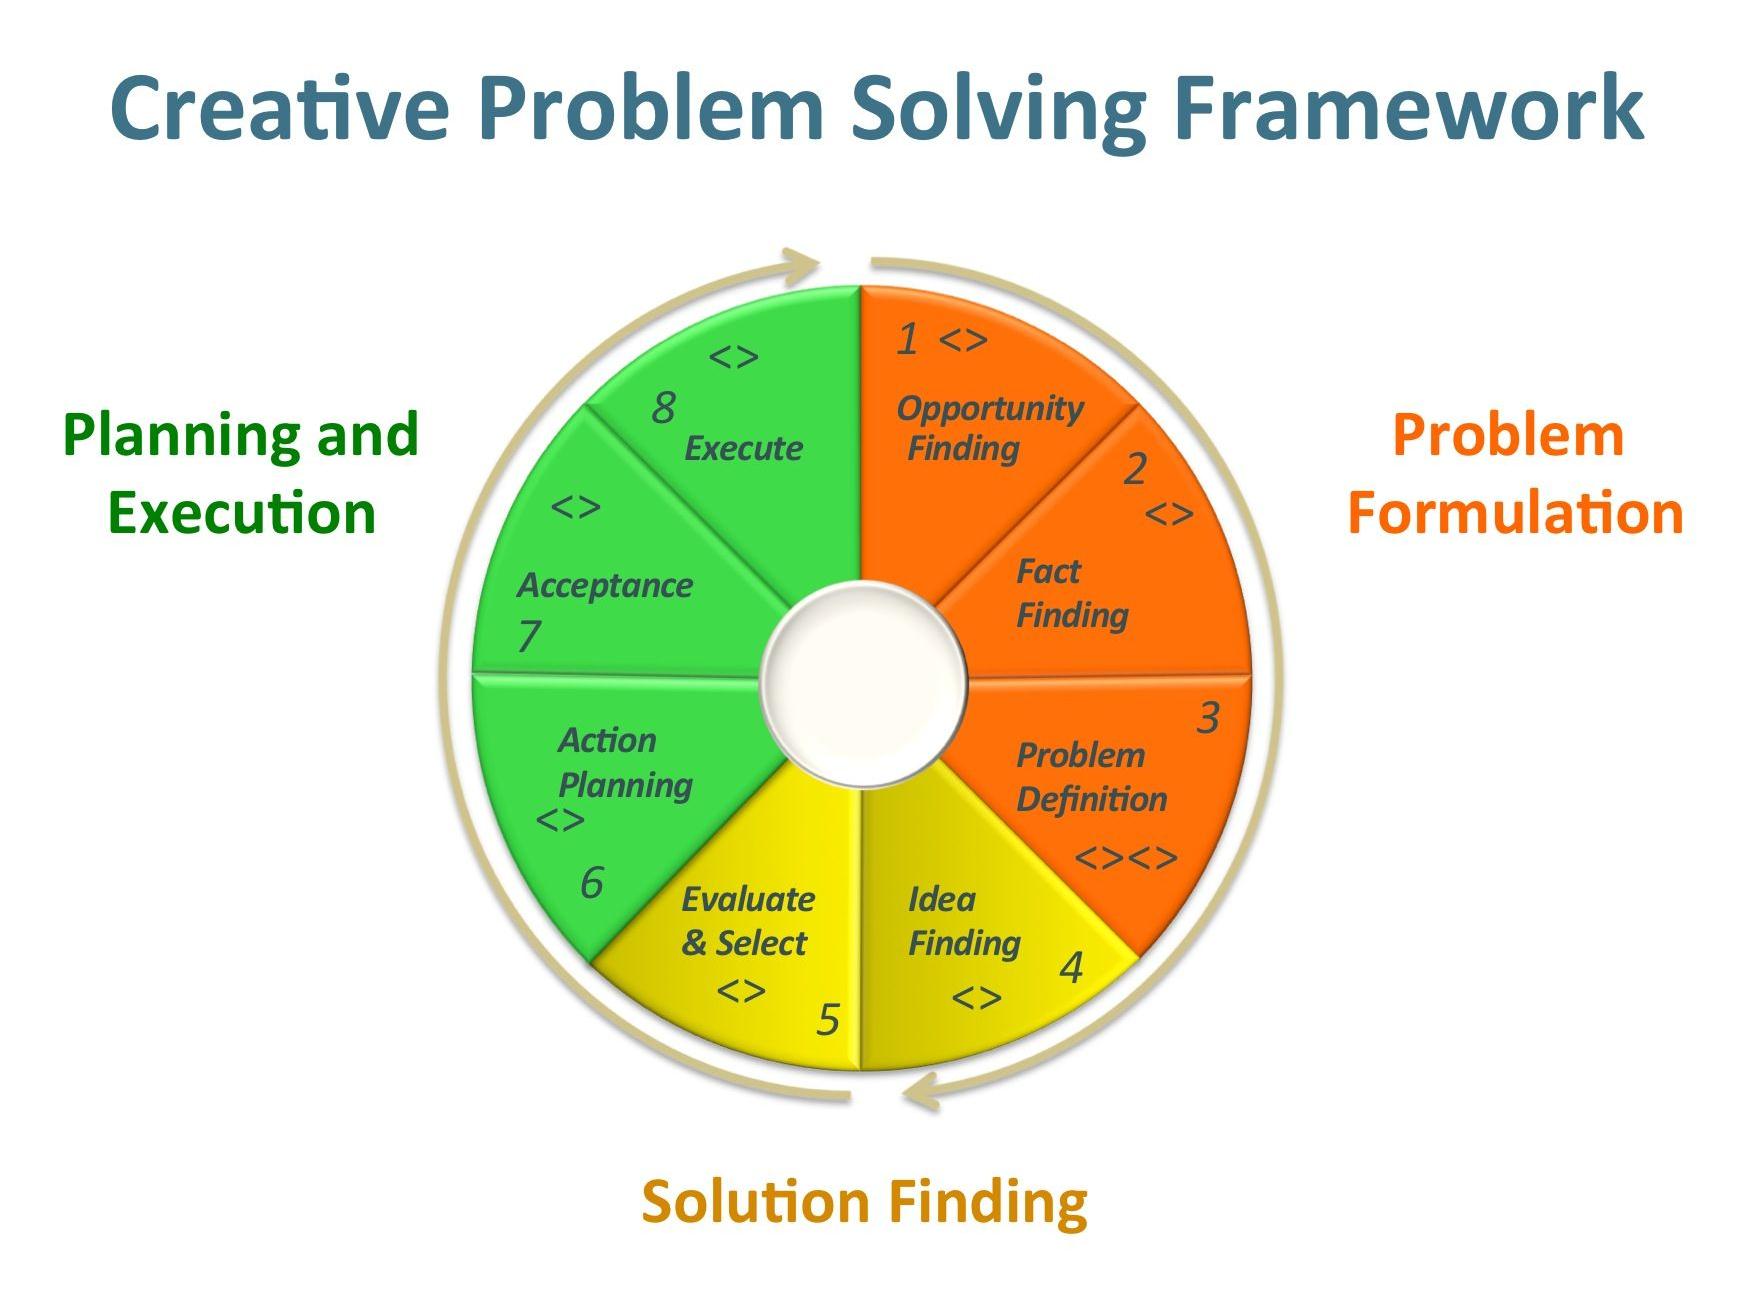 Creativity Tools for Developing Creative Solutions from